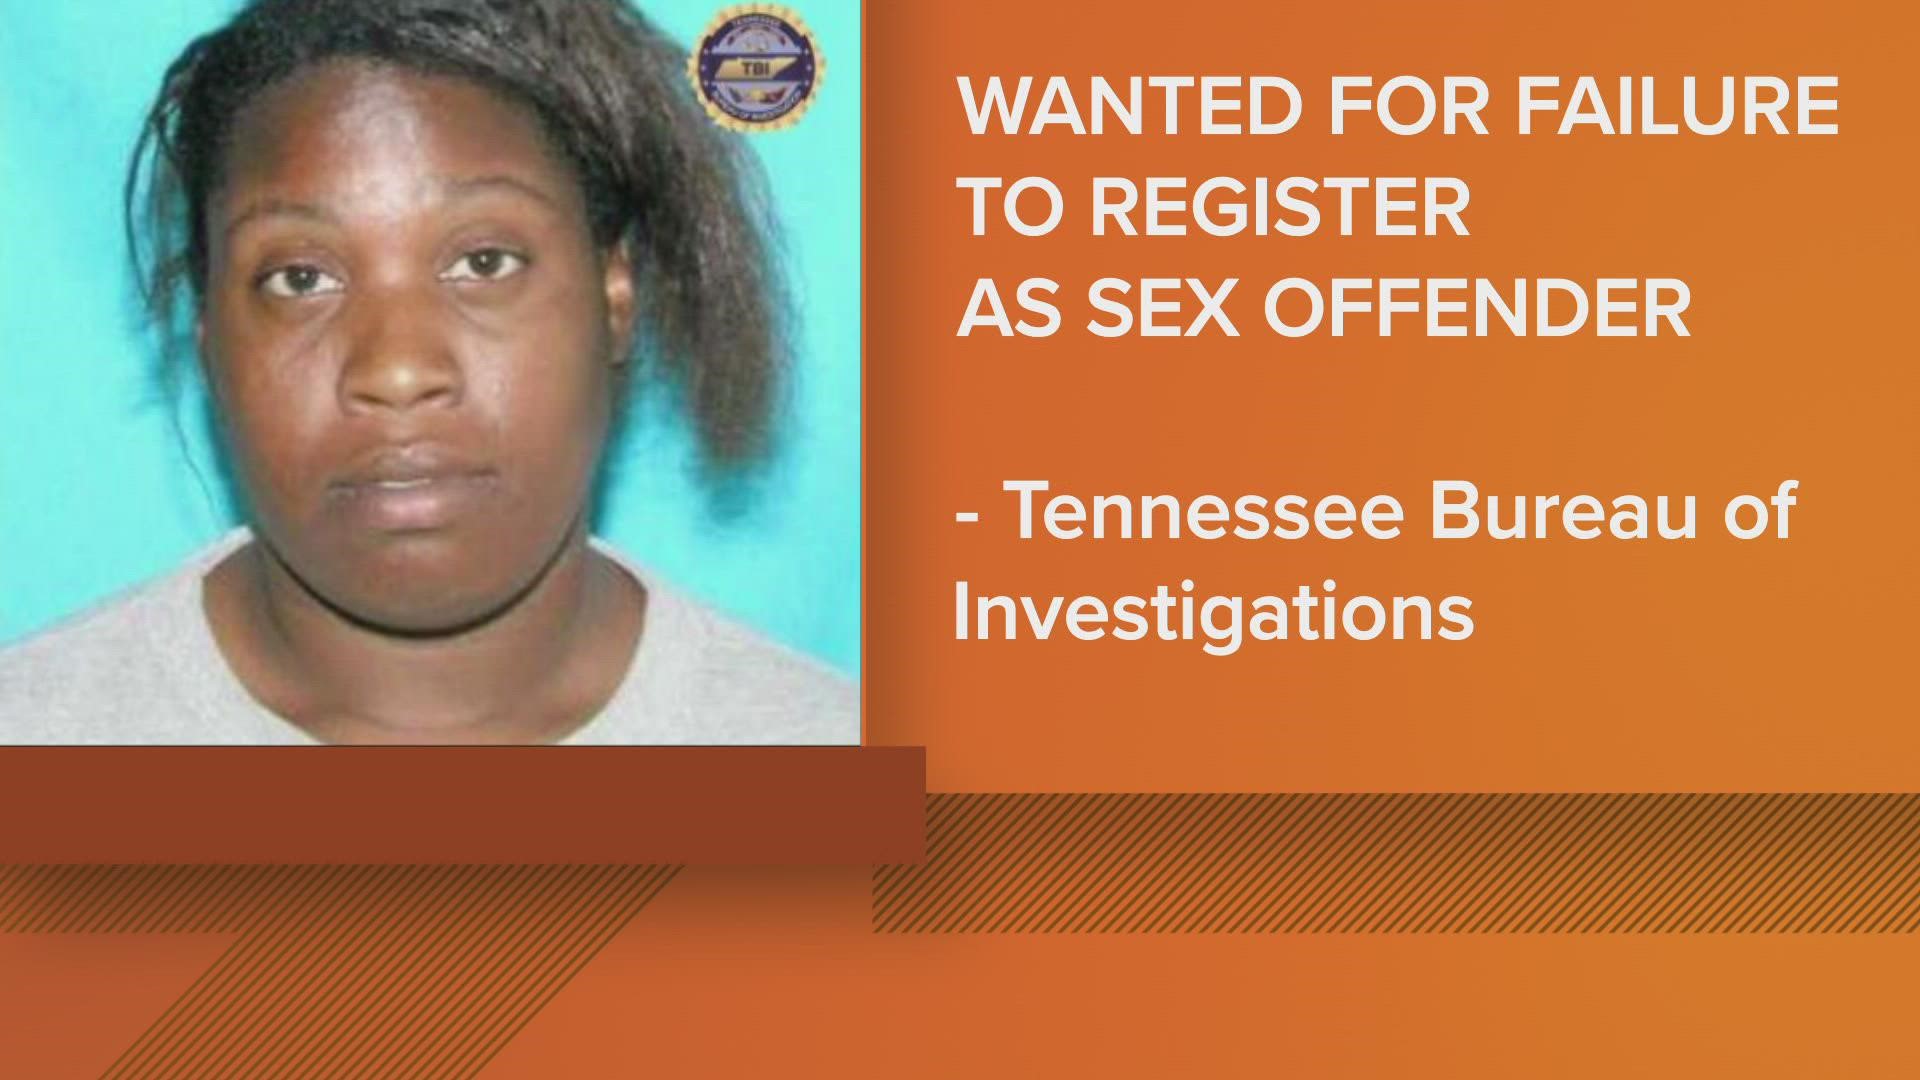 According to Tipton County Sheriff's Office, Linda Diane Tipton failed to register as a sex offender.